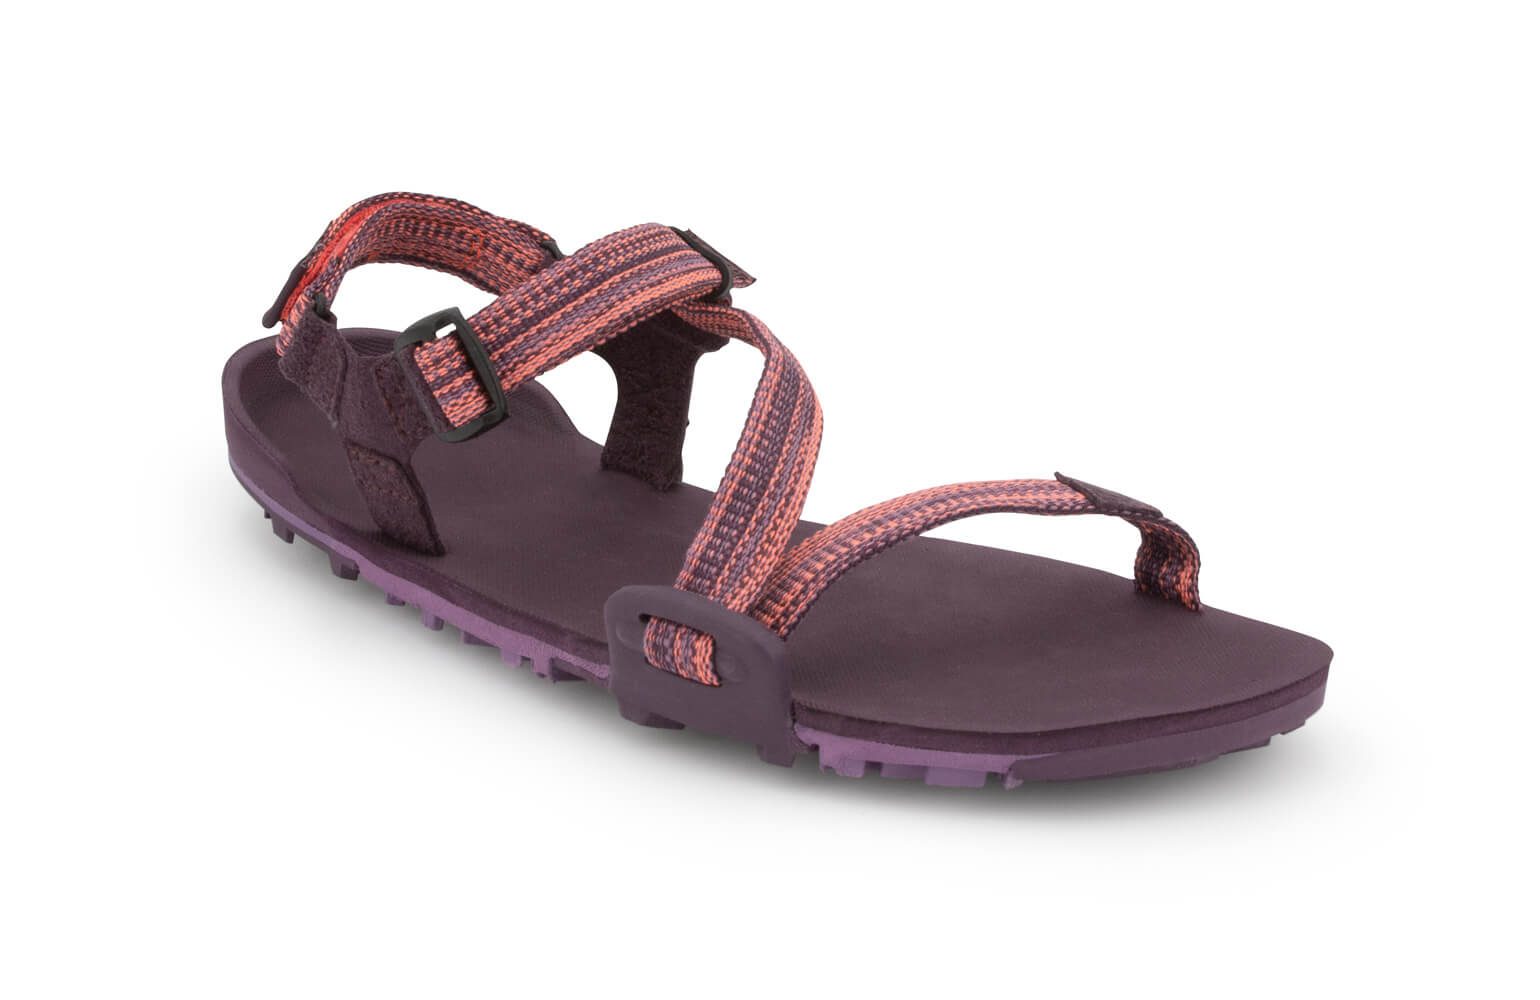 Xero Shoes - Z-Trail Sandal Review - RELENTLESS FORWARD COMMOTION